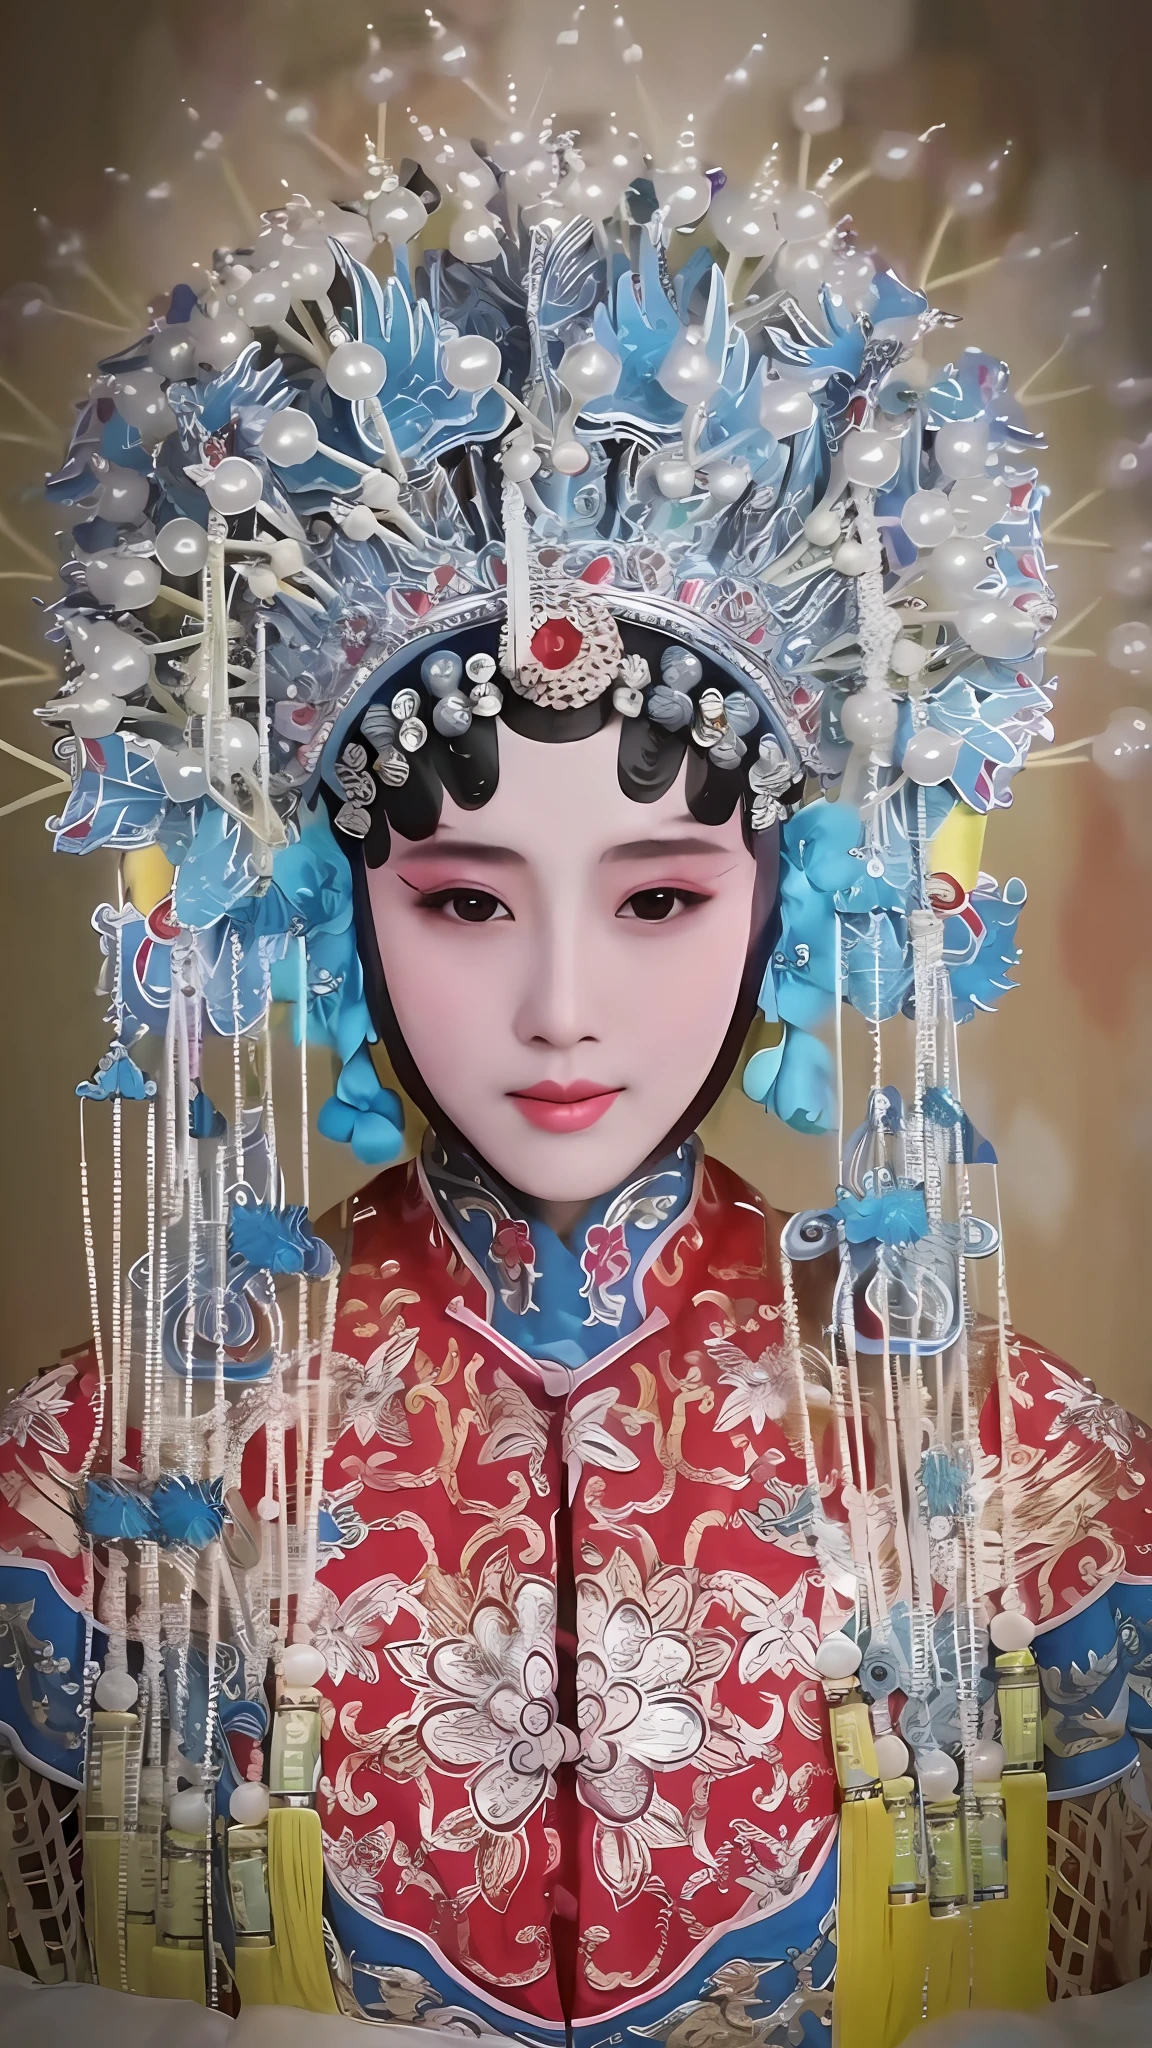 Close-up of a woman in a red and blue dress and headdress, beijing opera, chinese empress, Chinese traditional, China Princess, Princesa chinesa antiga, Chinese costume, inspired by Li Mei-shu, queen of the sea mu yanling, Wearing ancient Chinese clothes, gorgeous and huge head ornaments, a beautiful fantasy empress, Traditional Chinese clothing, traditional makeup